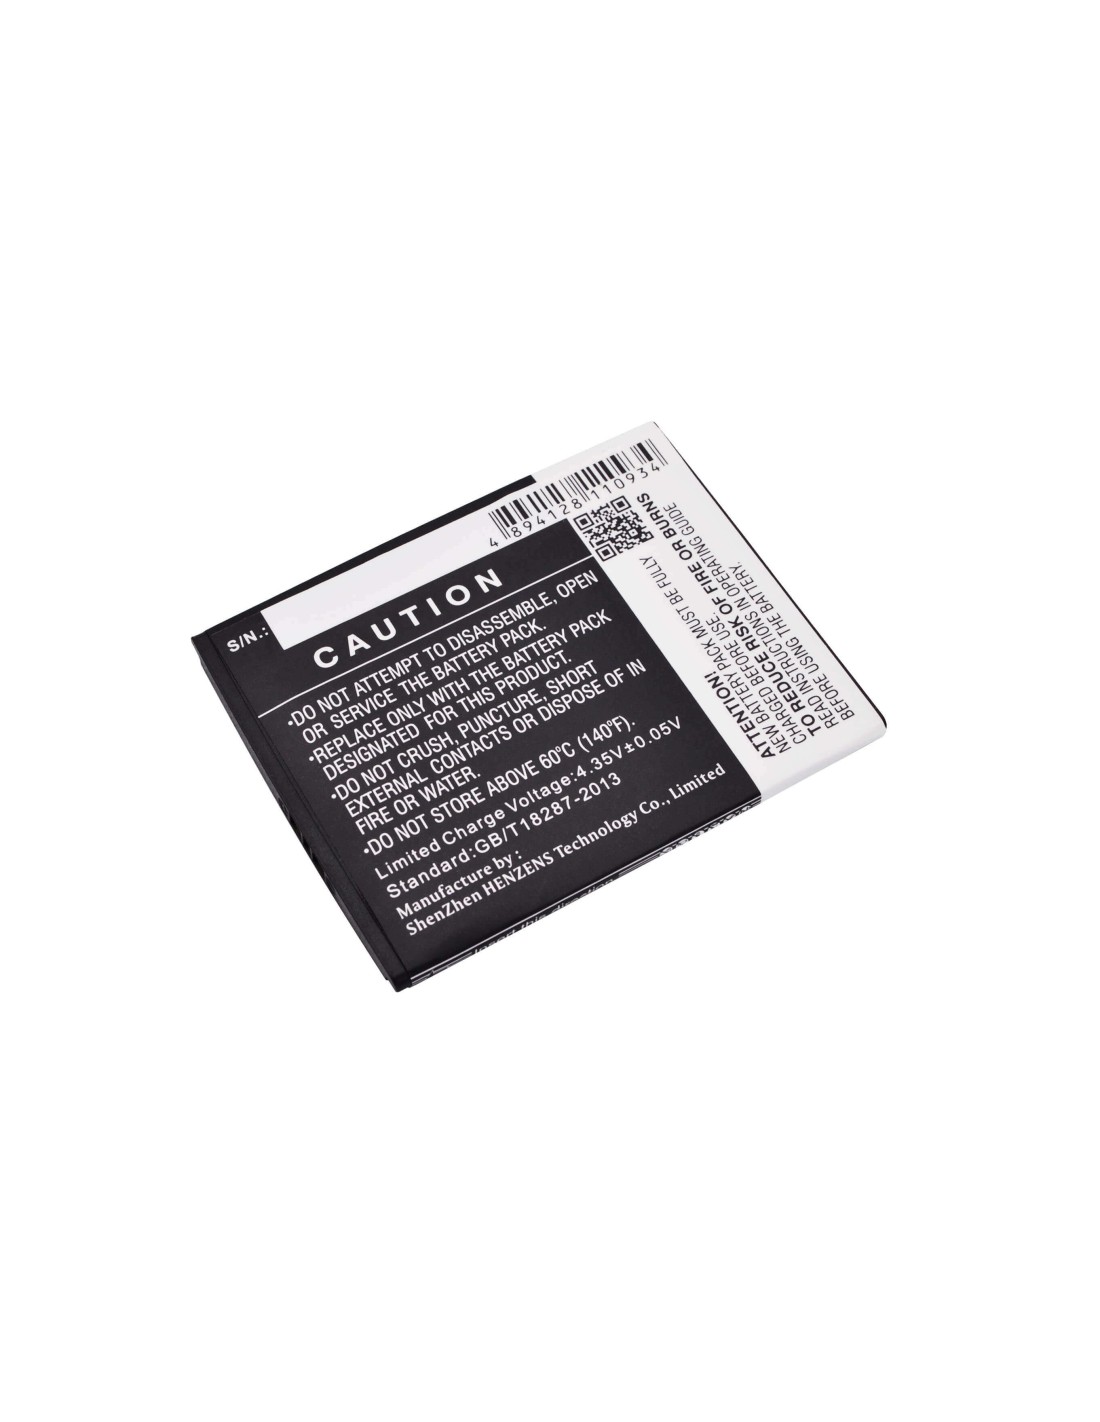 Battery for Medion Life P5001, MD 98664, Smartphone P5001 3.8V, 2000mAh - 7.60Wh